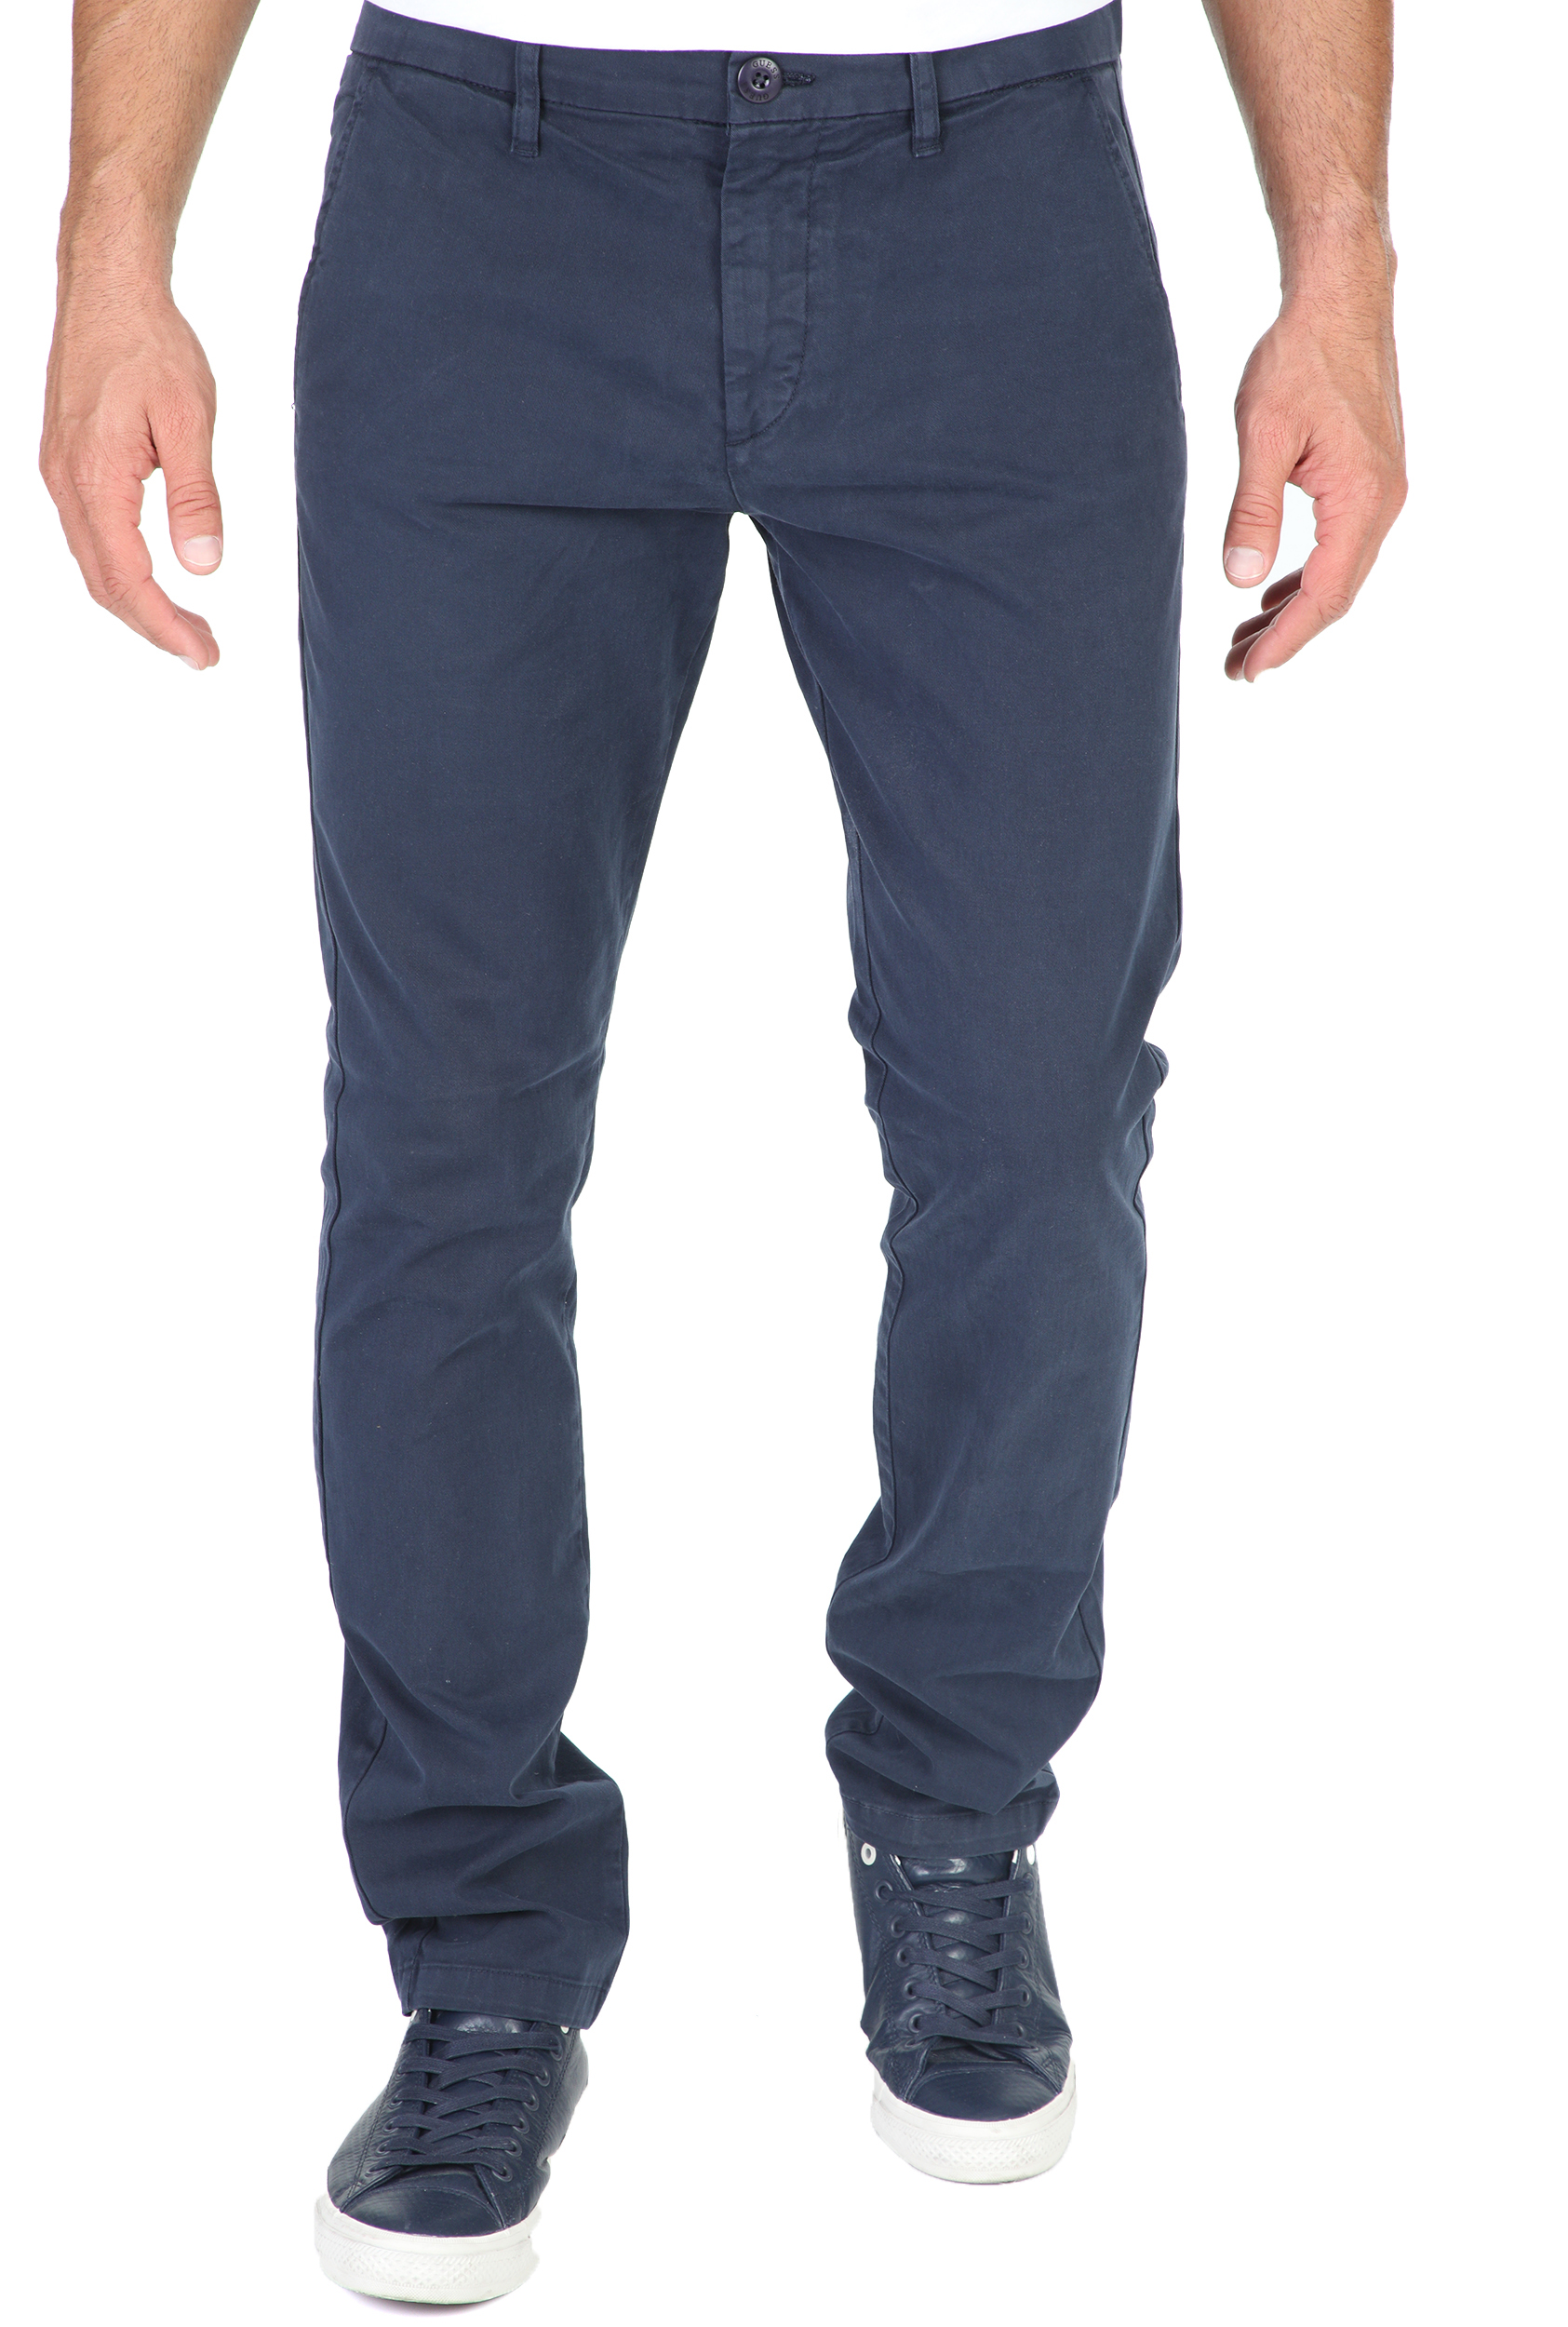 GUESS - Ανδρικό παντελόνι chino GUESS MYRON MID TWILL μπλε